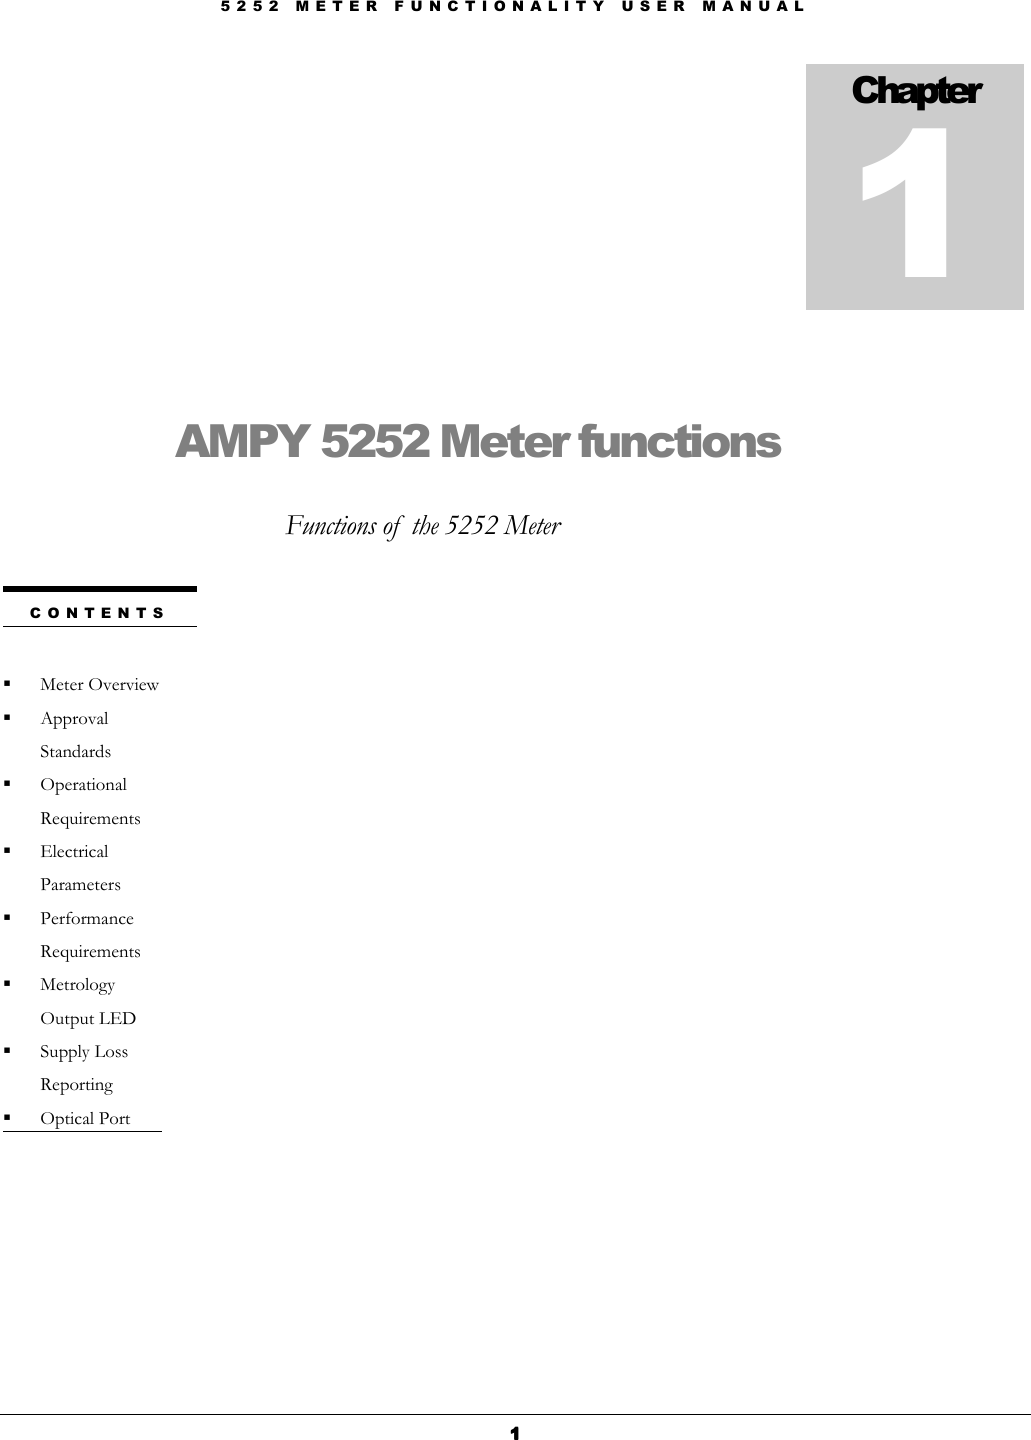 5 2 5 2   M E T E R   F U N C T I O N A L I T Y   U S E R   M A N U A L  1111      AMPY 5252 Meter functions Functions of  the 5252 Meter            Chapter 1 C O N T E N T S   Meter Overview  Approval Standards  Operational Requirements  Electrical Parameters  Performance Requirements  Metrology Output LED  Supply Loss Reporting  Optical Port 